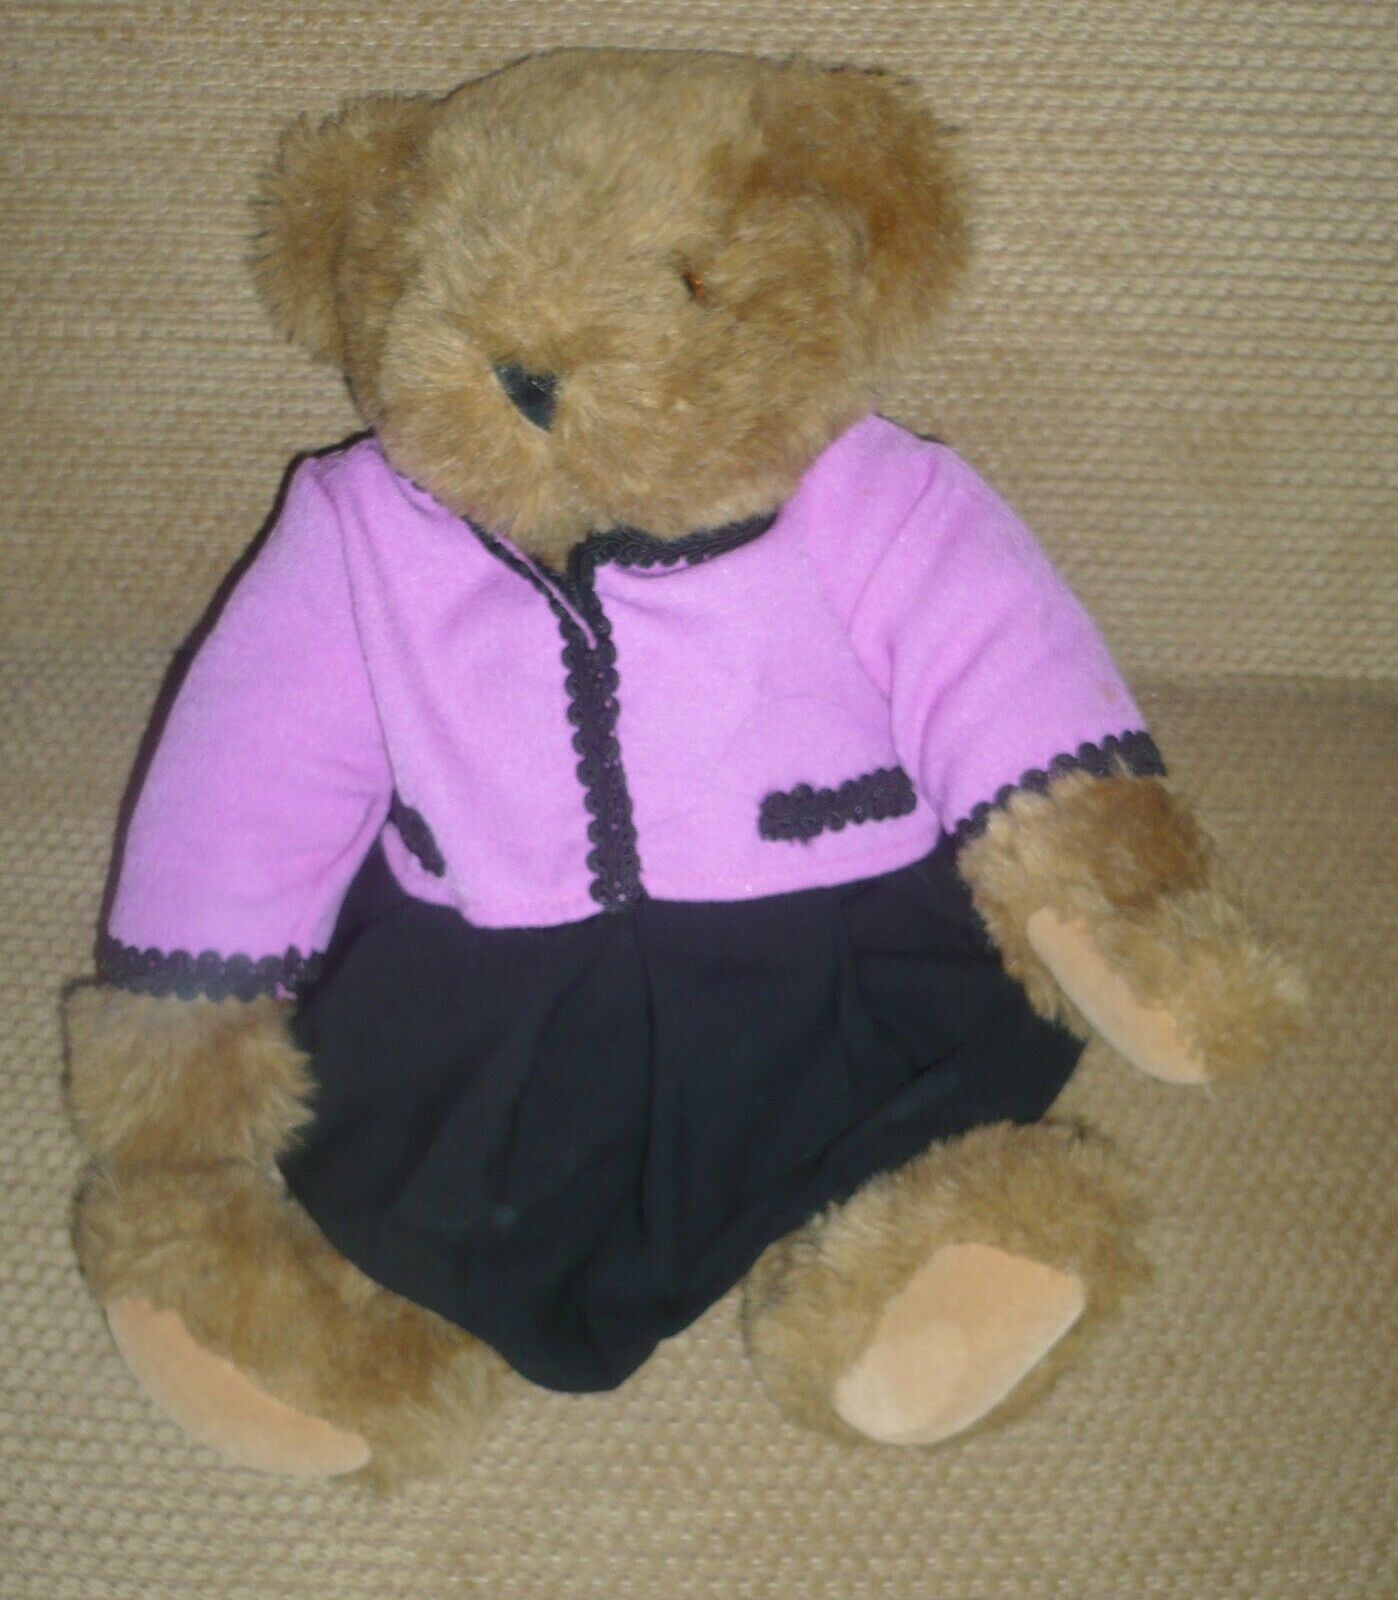 Vermont Teddy Bear Jointed 16